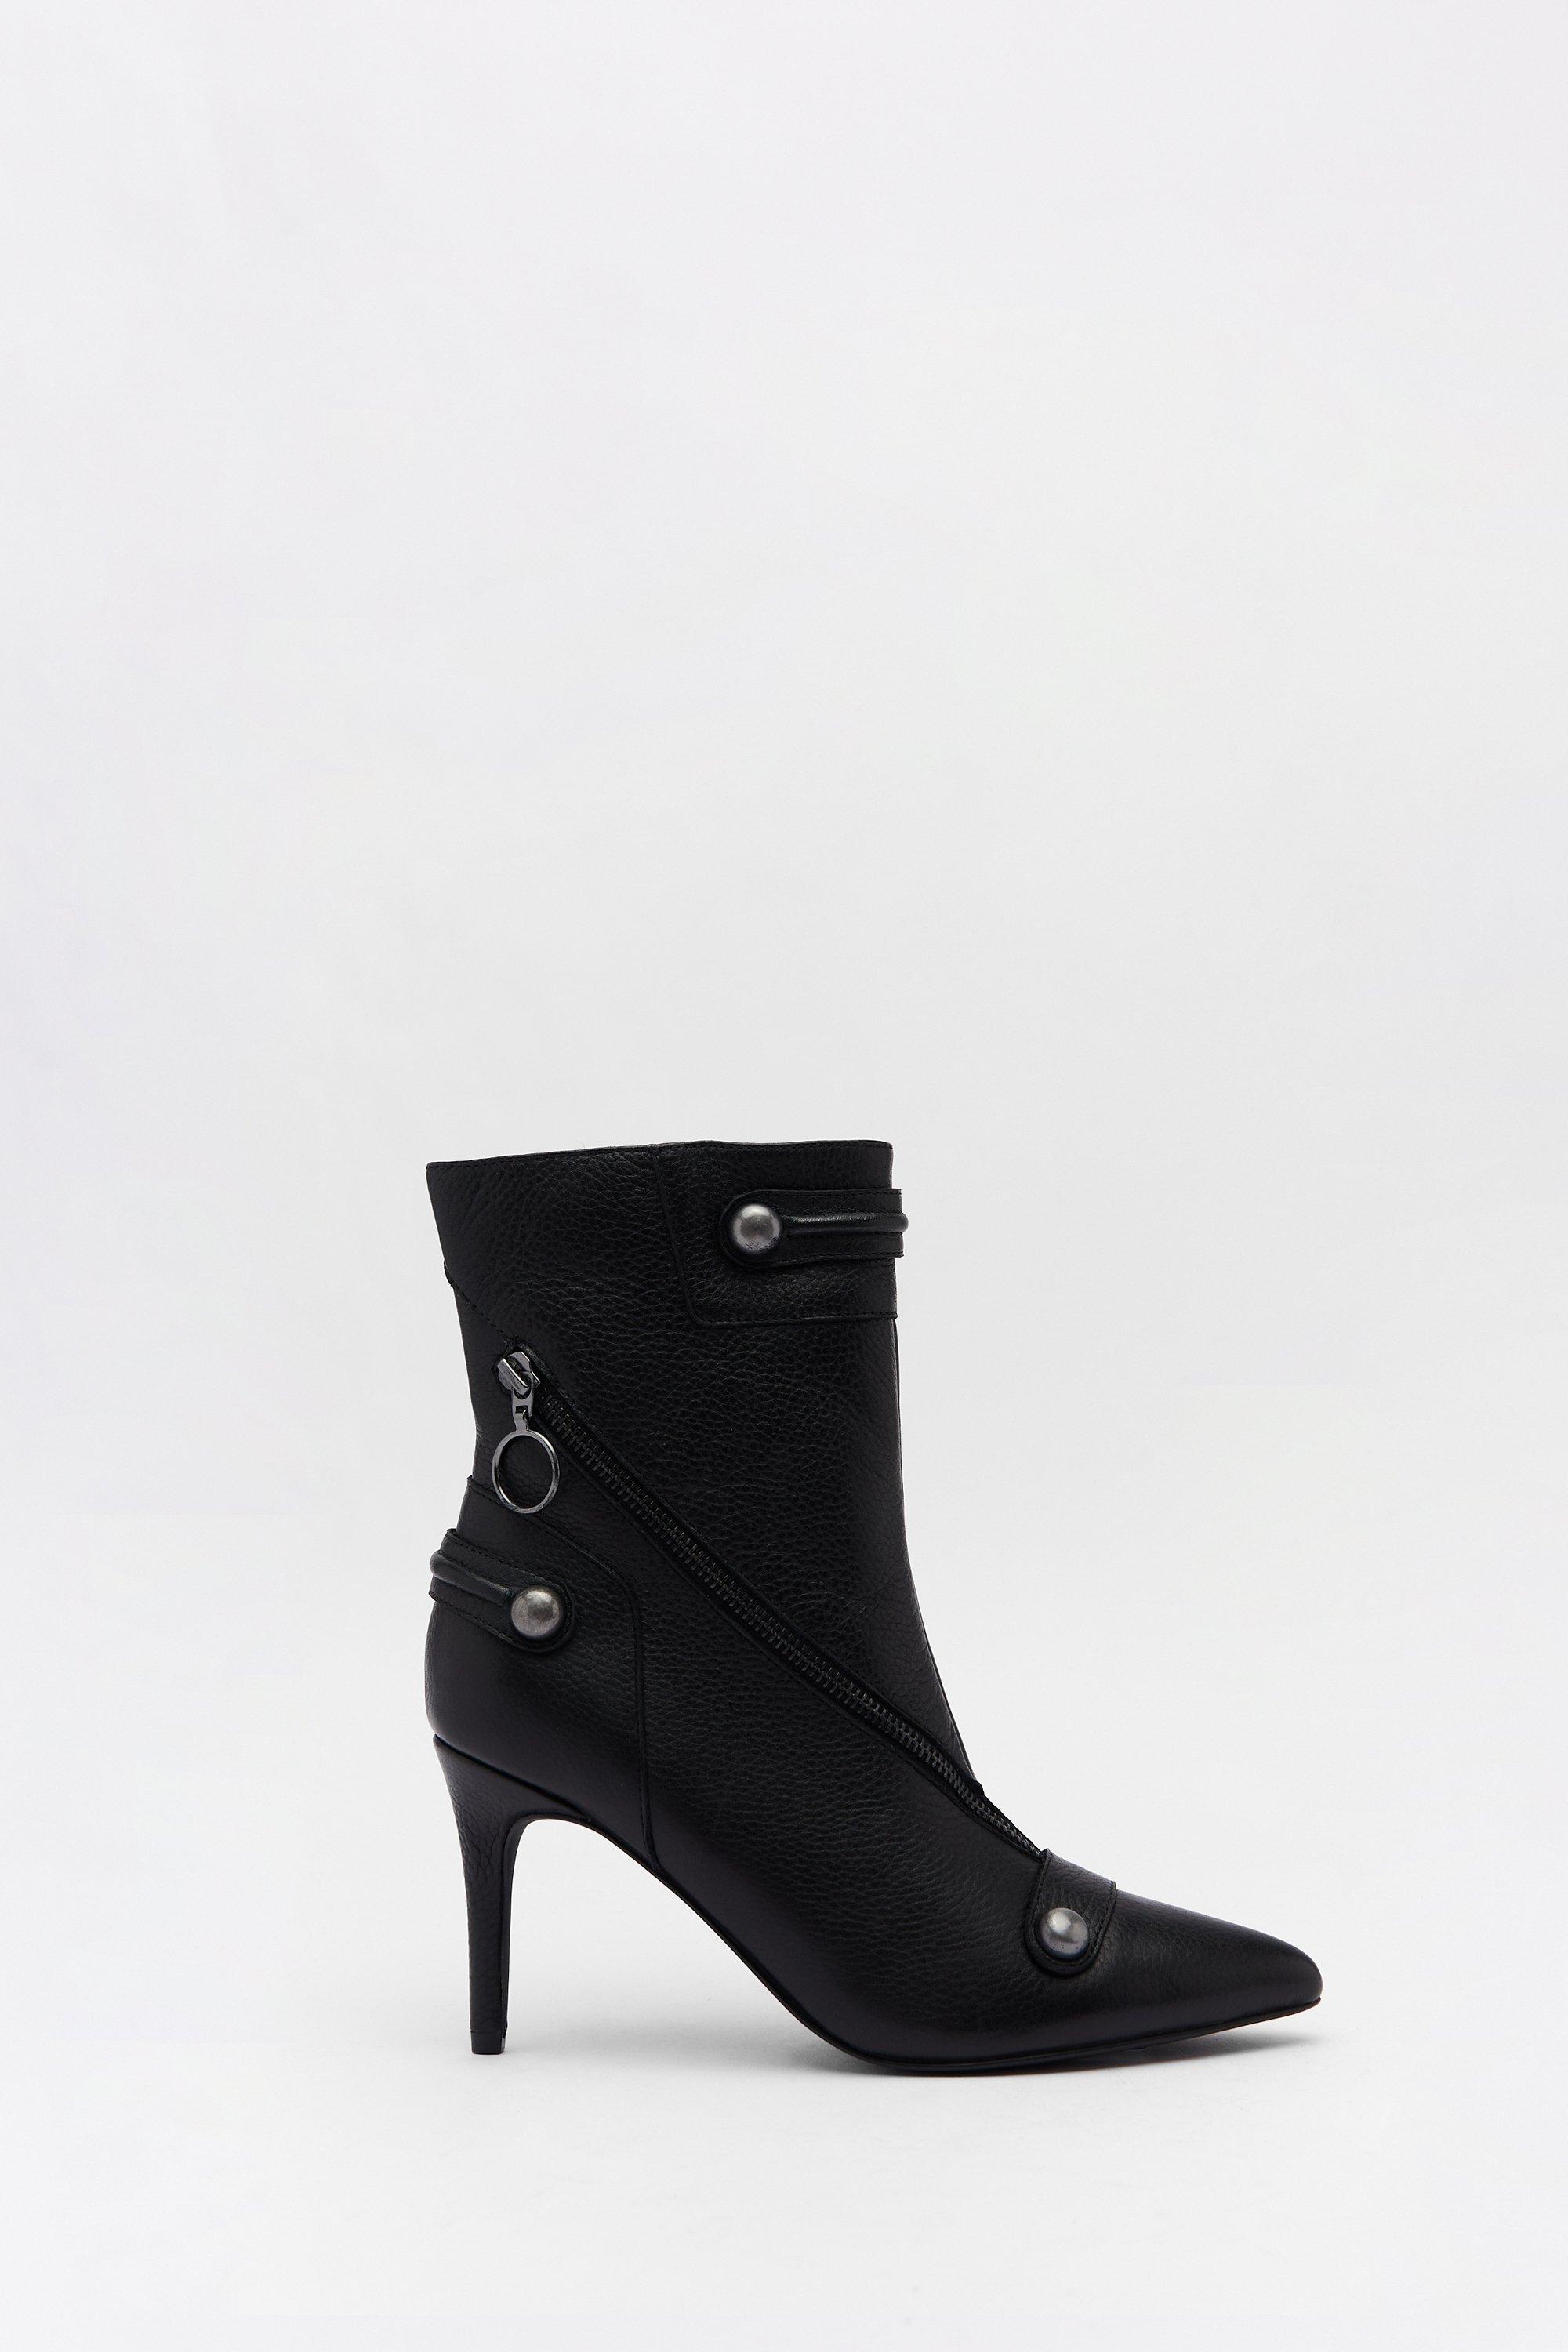 Womens Leather Zip & Stud Pointed Toe Ankle Boots - black